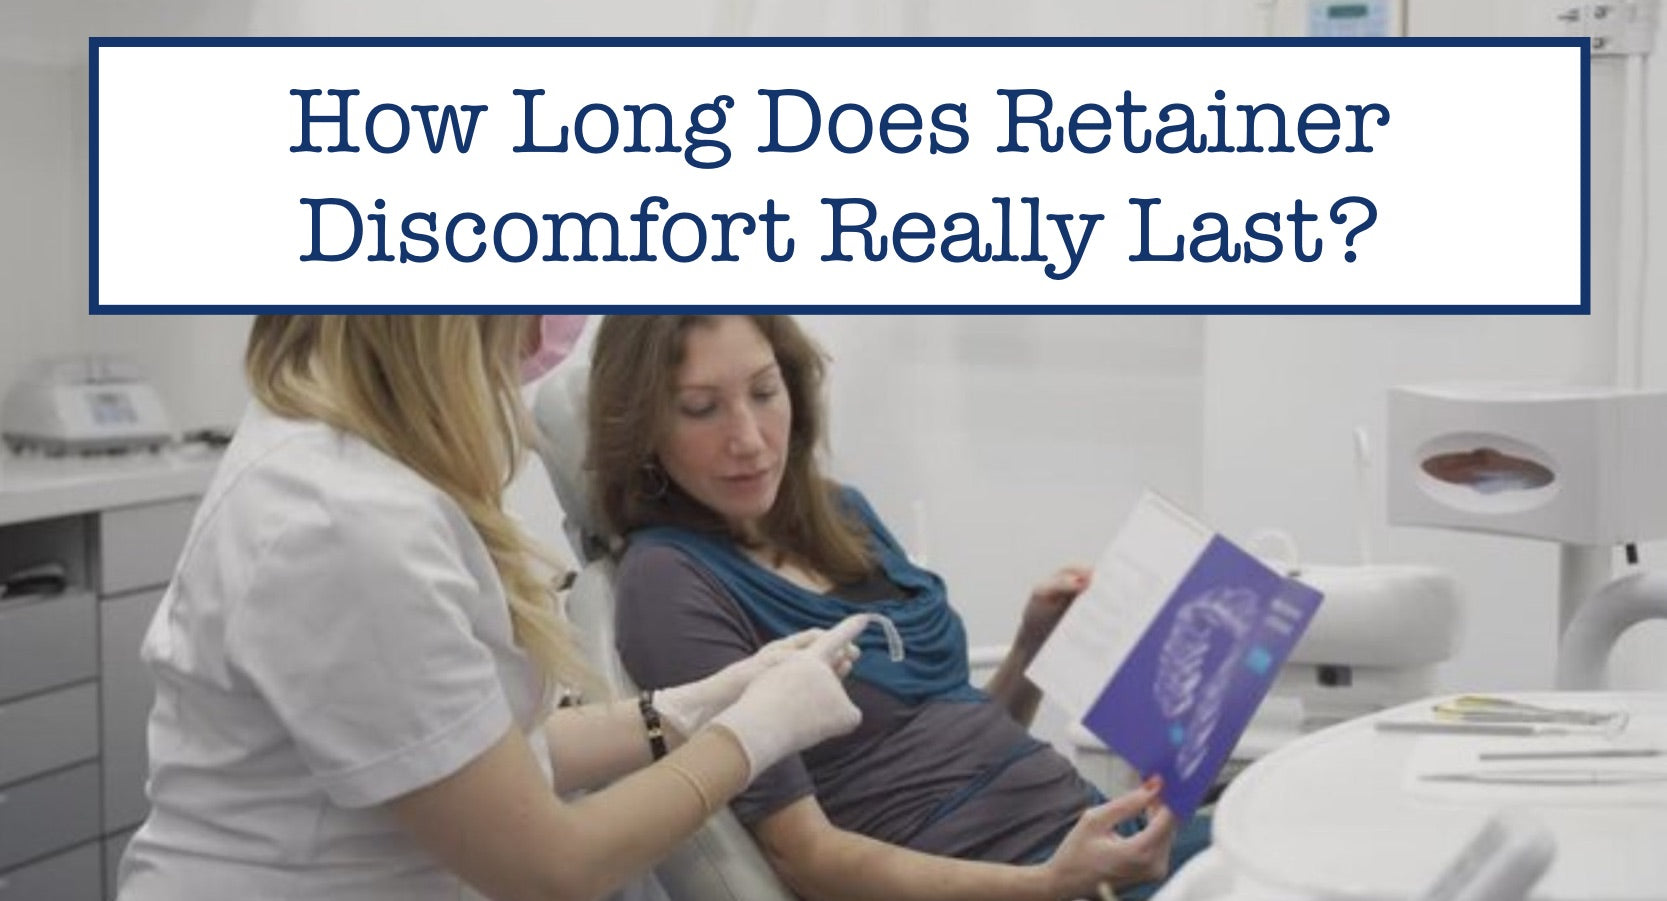 How Long Does Retainer Discomfort Really Last?